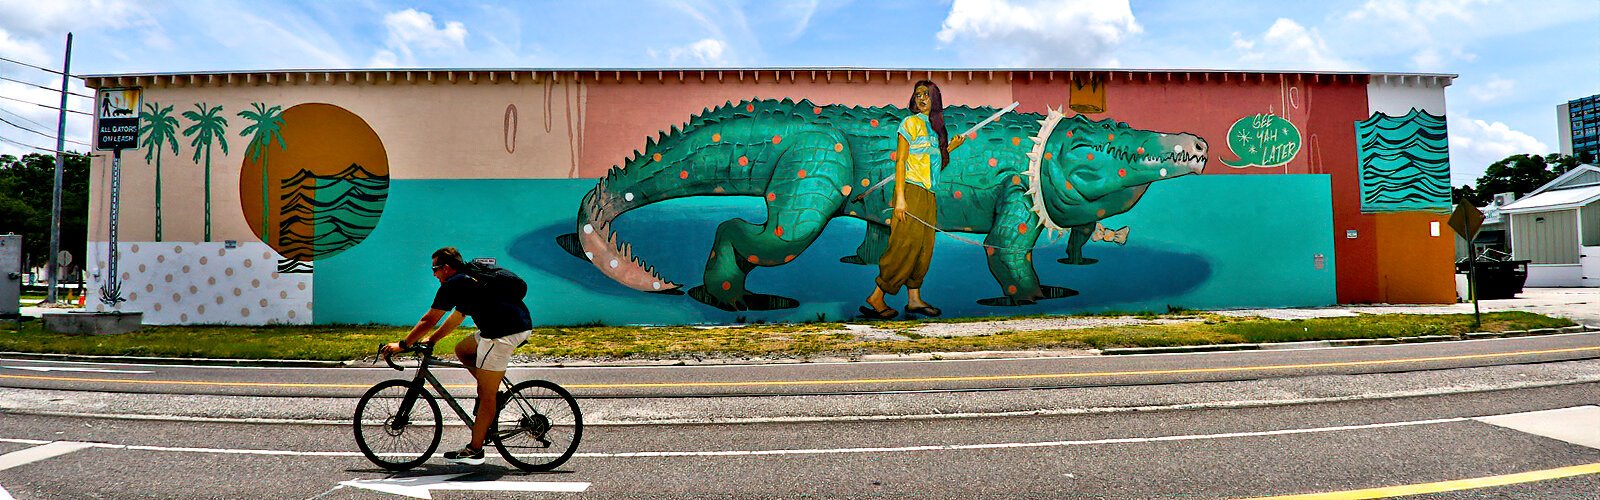 Created by muralists MJ Lindo-Lawyer and Joshua Lawyer in 2021, the whimsical "After a While” mural at South East Avenue and Franklin Street depicts a woman out for a walk with her pet alligator.